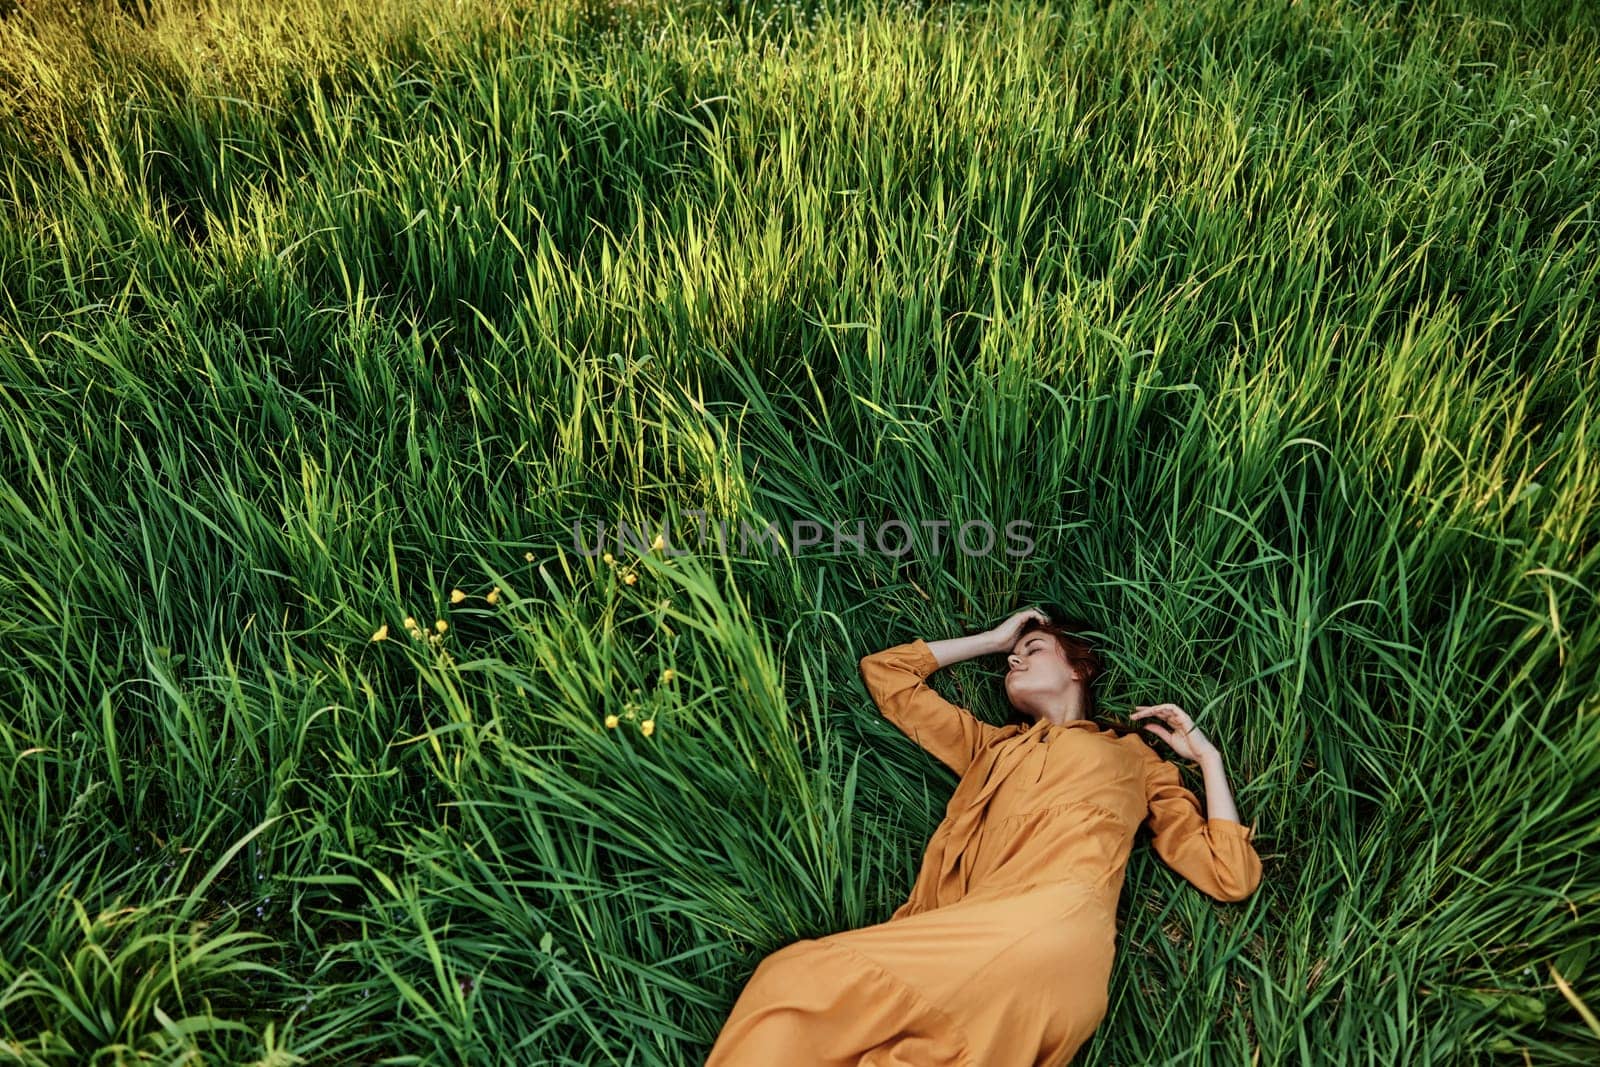 a sweet, calm woman in an orange dress lies in a green field with her hands under her head enjoying silence and peace. Horizontal photo taken from above. High quality photo